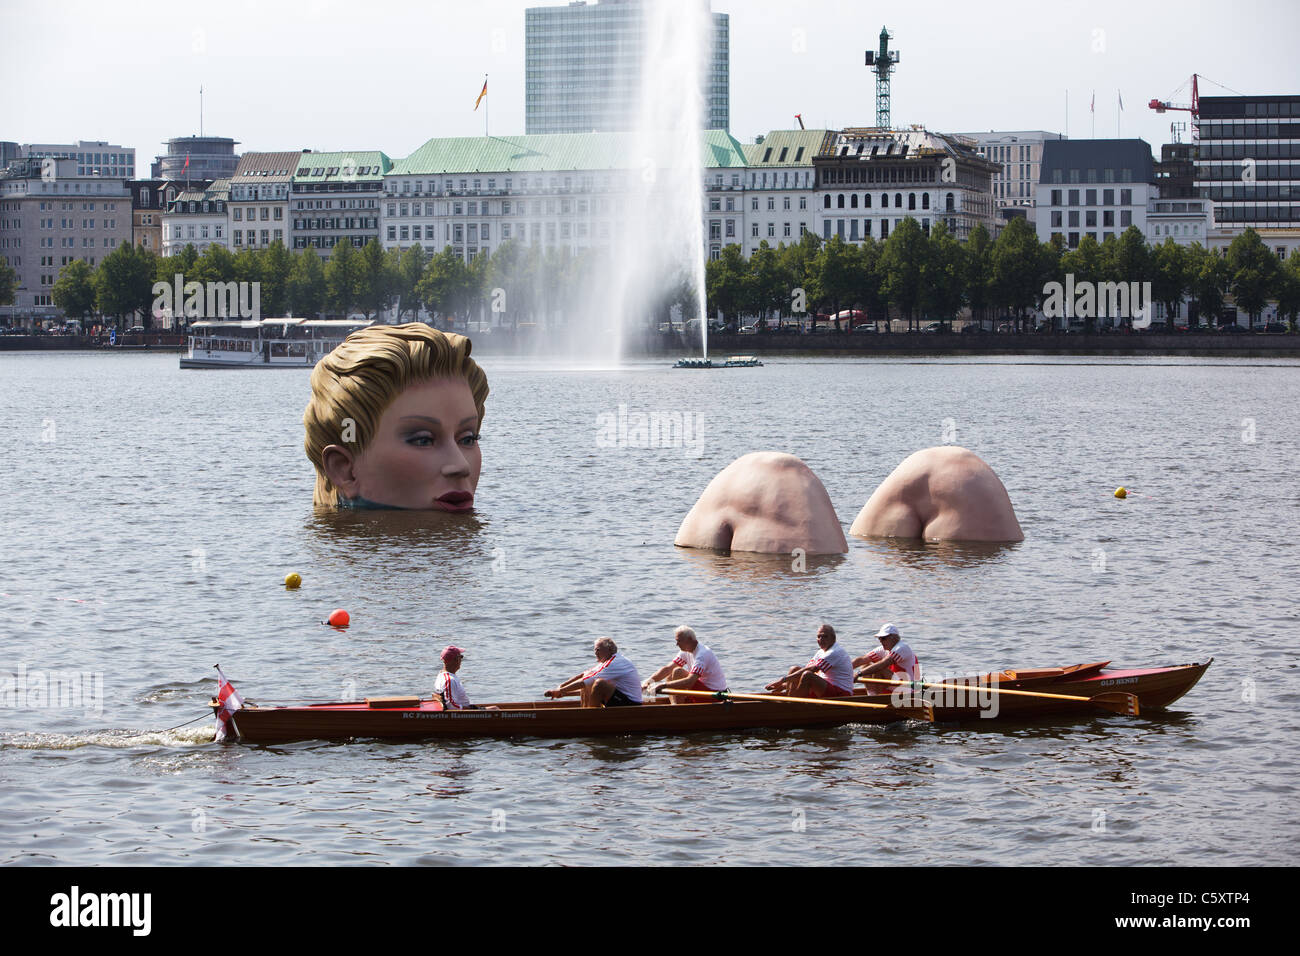 A 'mermaid' sculpture created by Oliver Voss is seen on Alster lake. Stock Photo